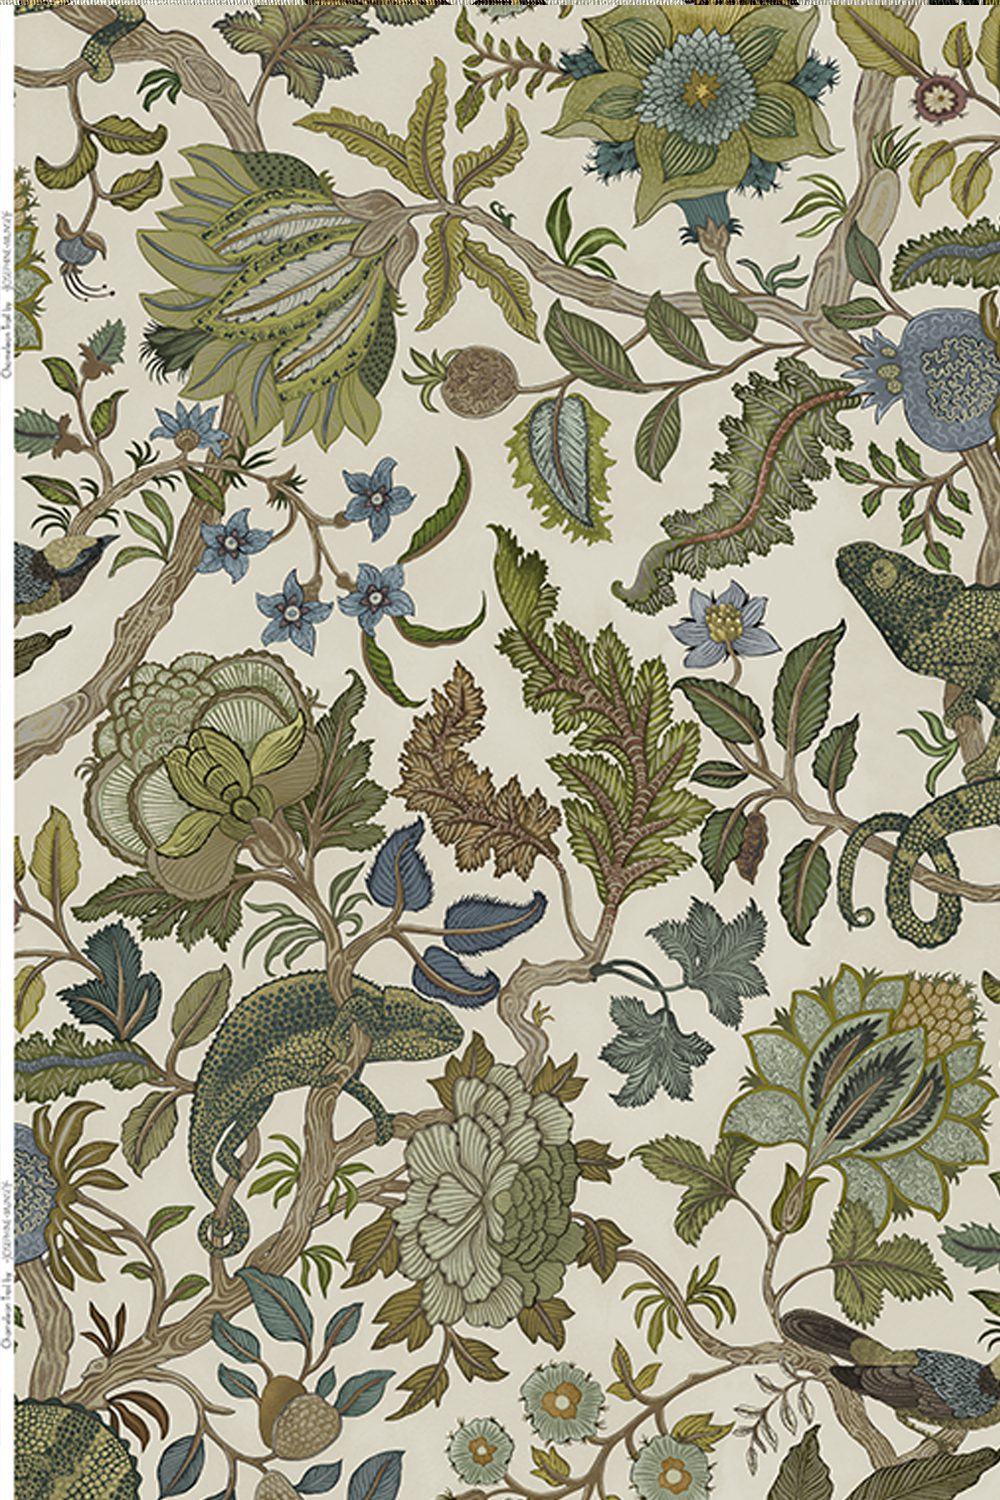 Chameleon Trail Fabric | Sage and Green | Pure Linen